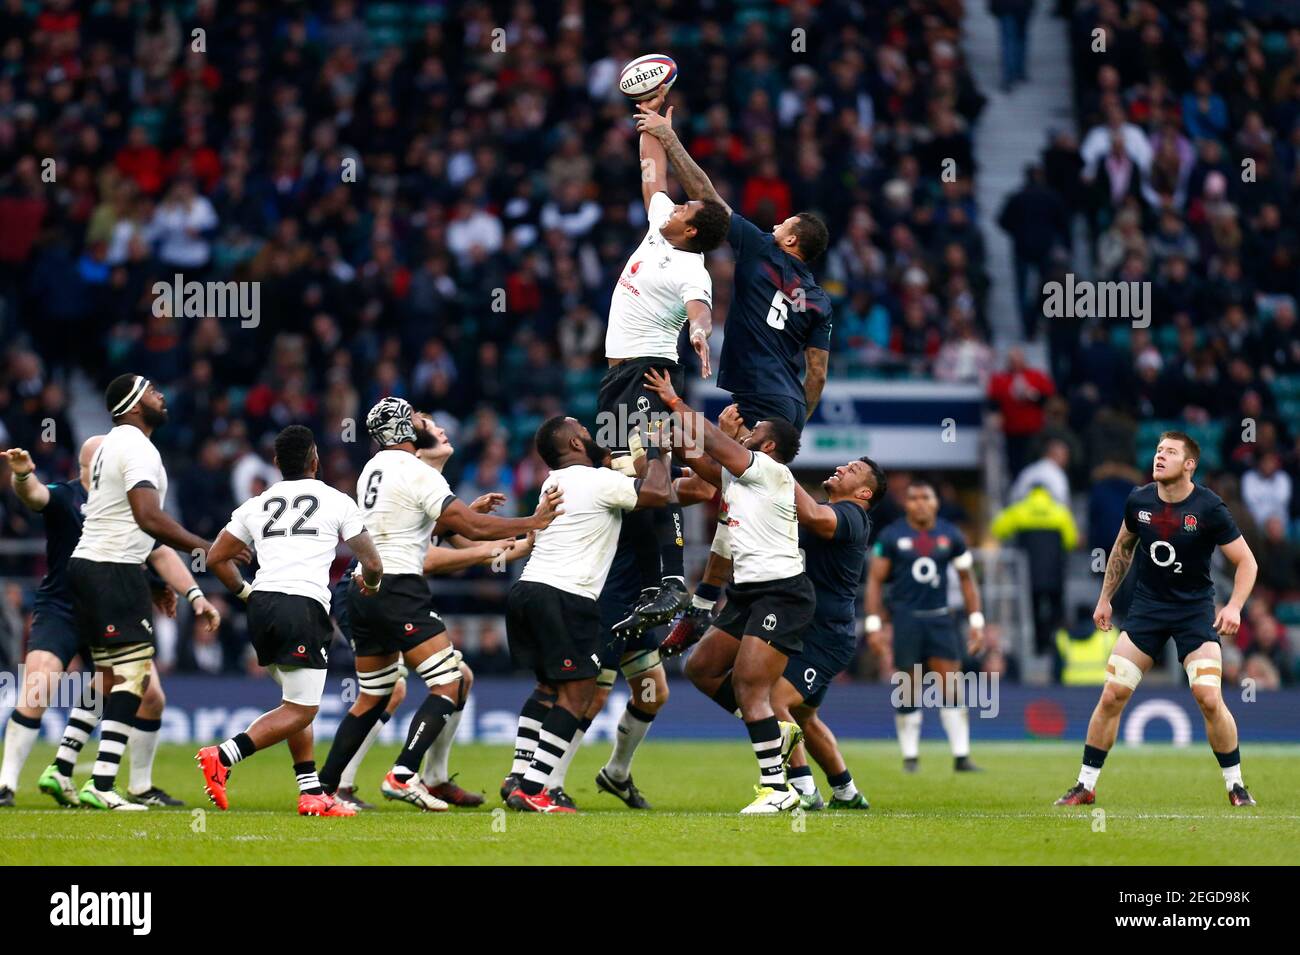 Britain Rugby Union - England v Fiji - 2016 Old Mutual Wealth Series - Twickenham Stadium, London, England - 19/11/16 Fiji's Leone Nakarawa in action with England's Courtney Lawes during a line out Reuters / Andrew Winning Livepic EDITORIAL USE ONLY. Stock Photo